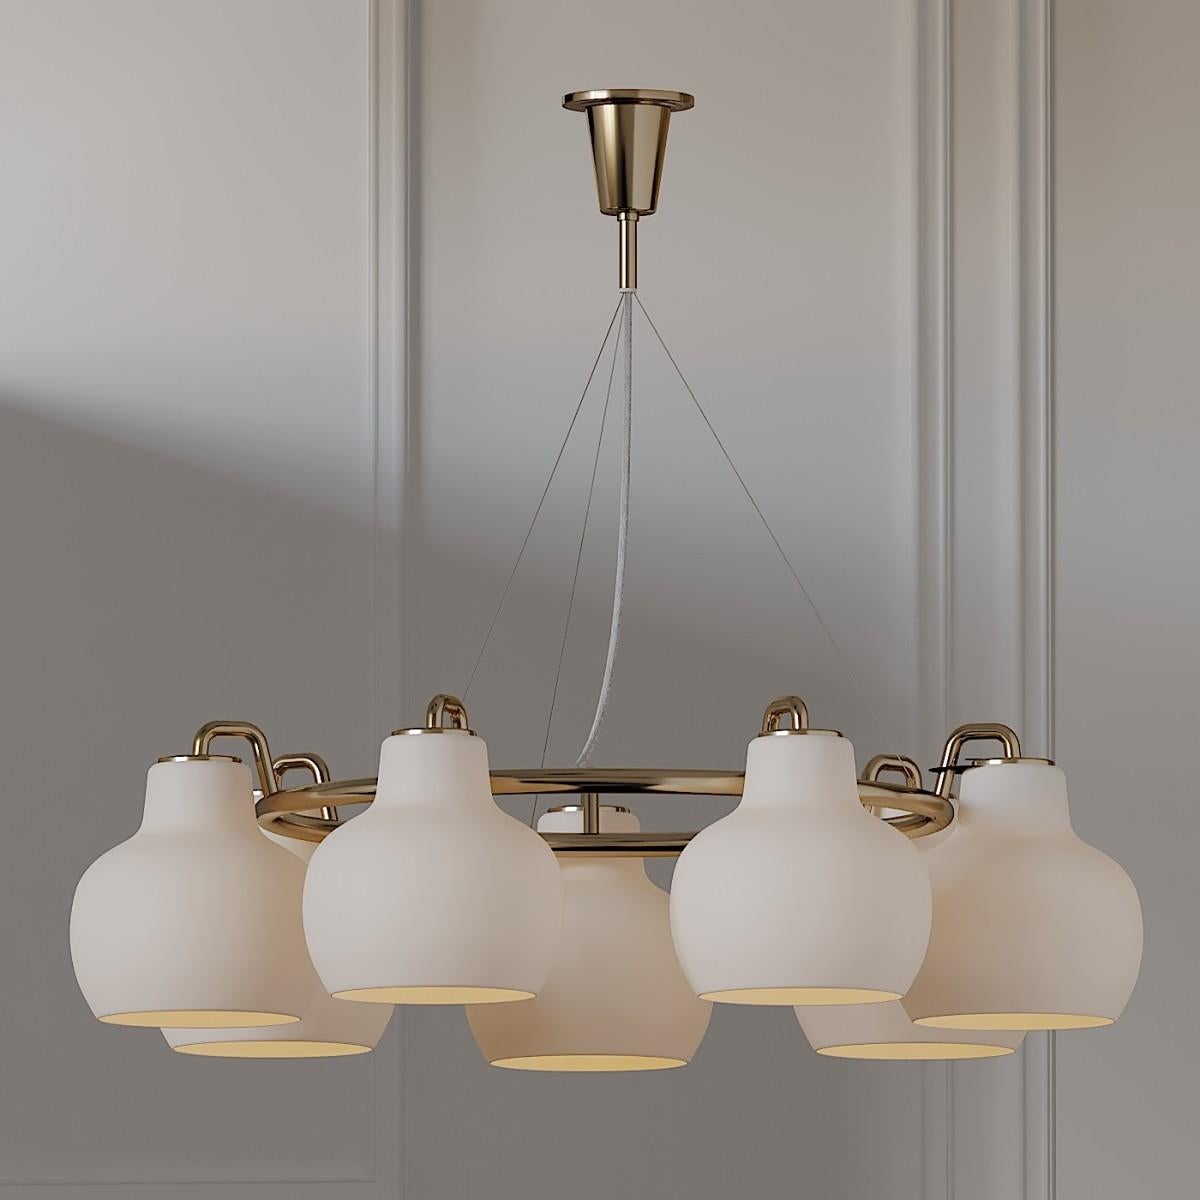 Louis Poulsen, pendant 7 light by Vilhelm Lauritzen
Measures: Width 893 x height 233 x length 893(mm), 10.8 kg
 
7 Shades. Material: Shades: Mouth-blown, 3-layered, polished opal glass. Frame and canopy: Satin polished brass, untreated. Please